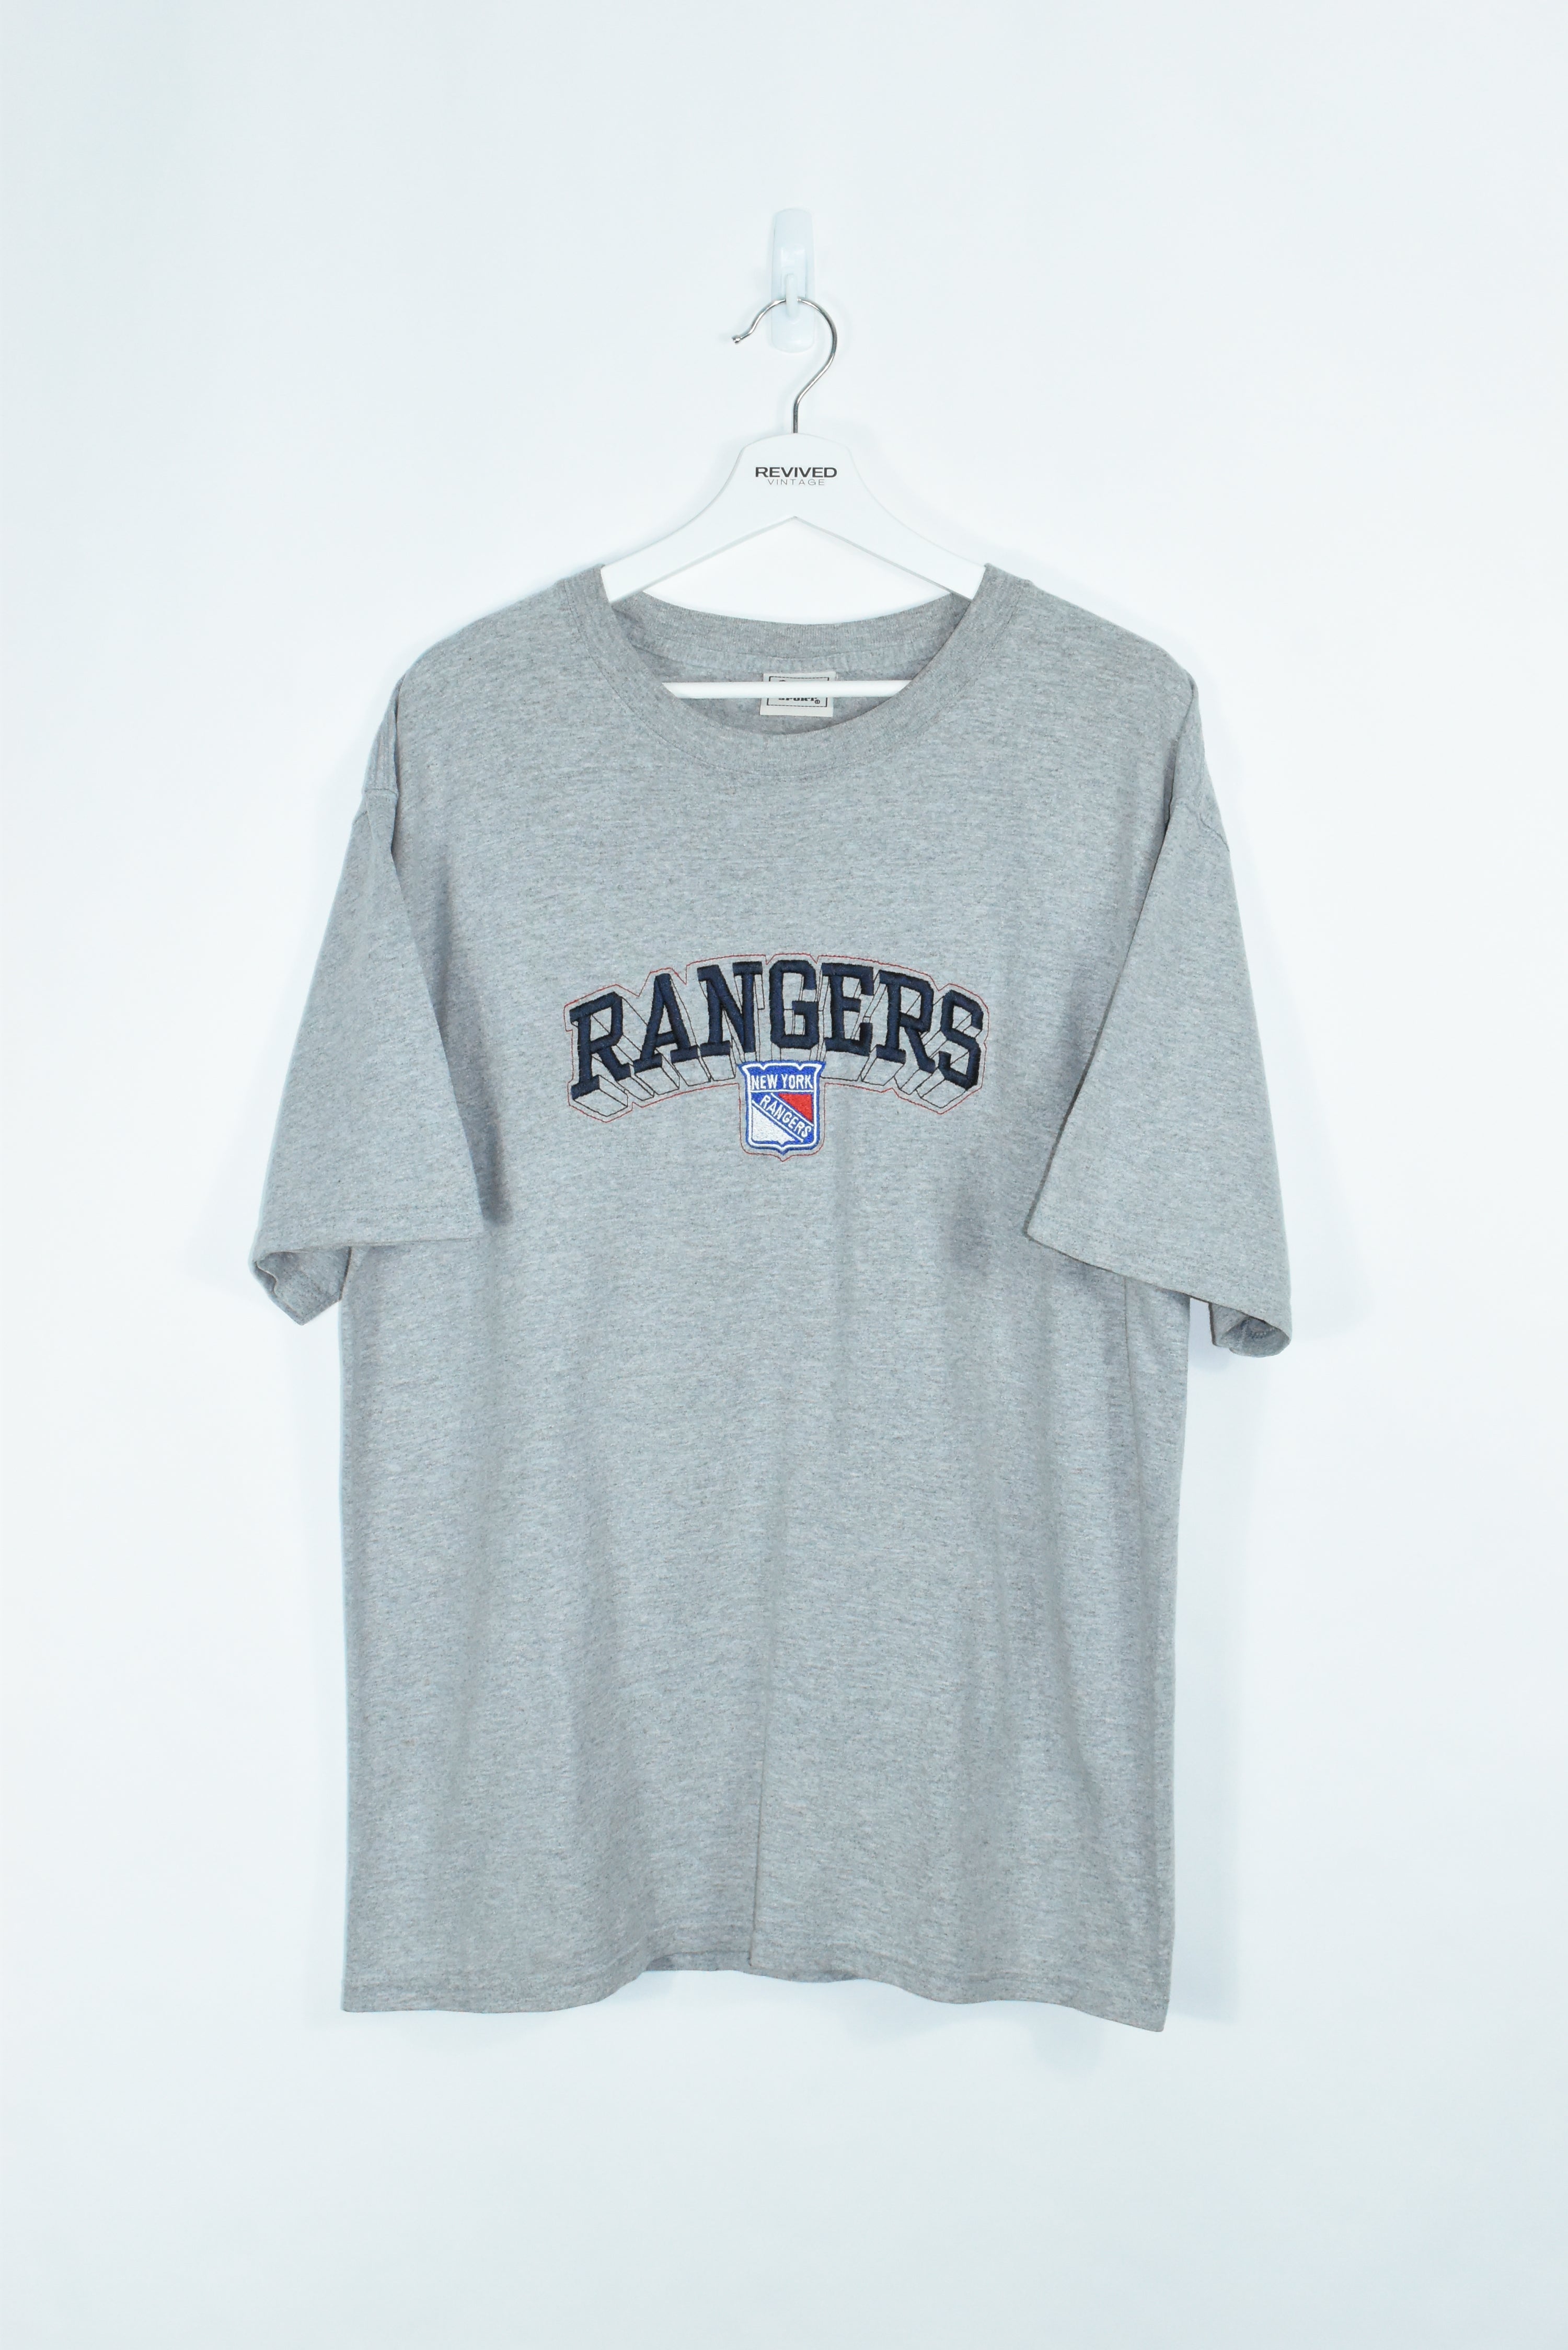 Vintage Lee Sport Embroidery NY Rangers T Shirt Xlarge